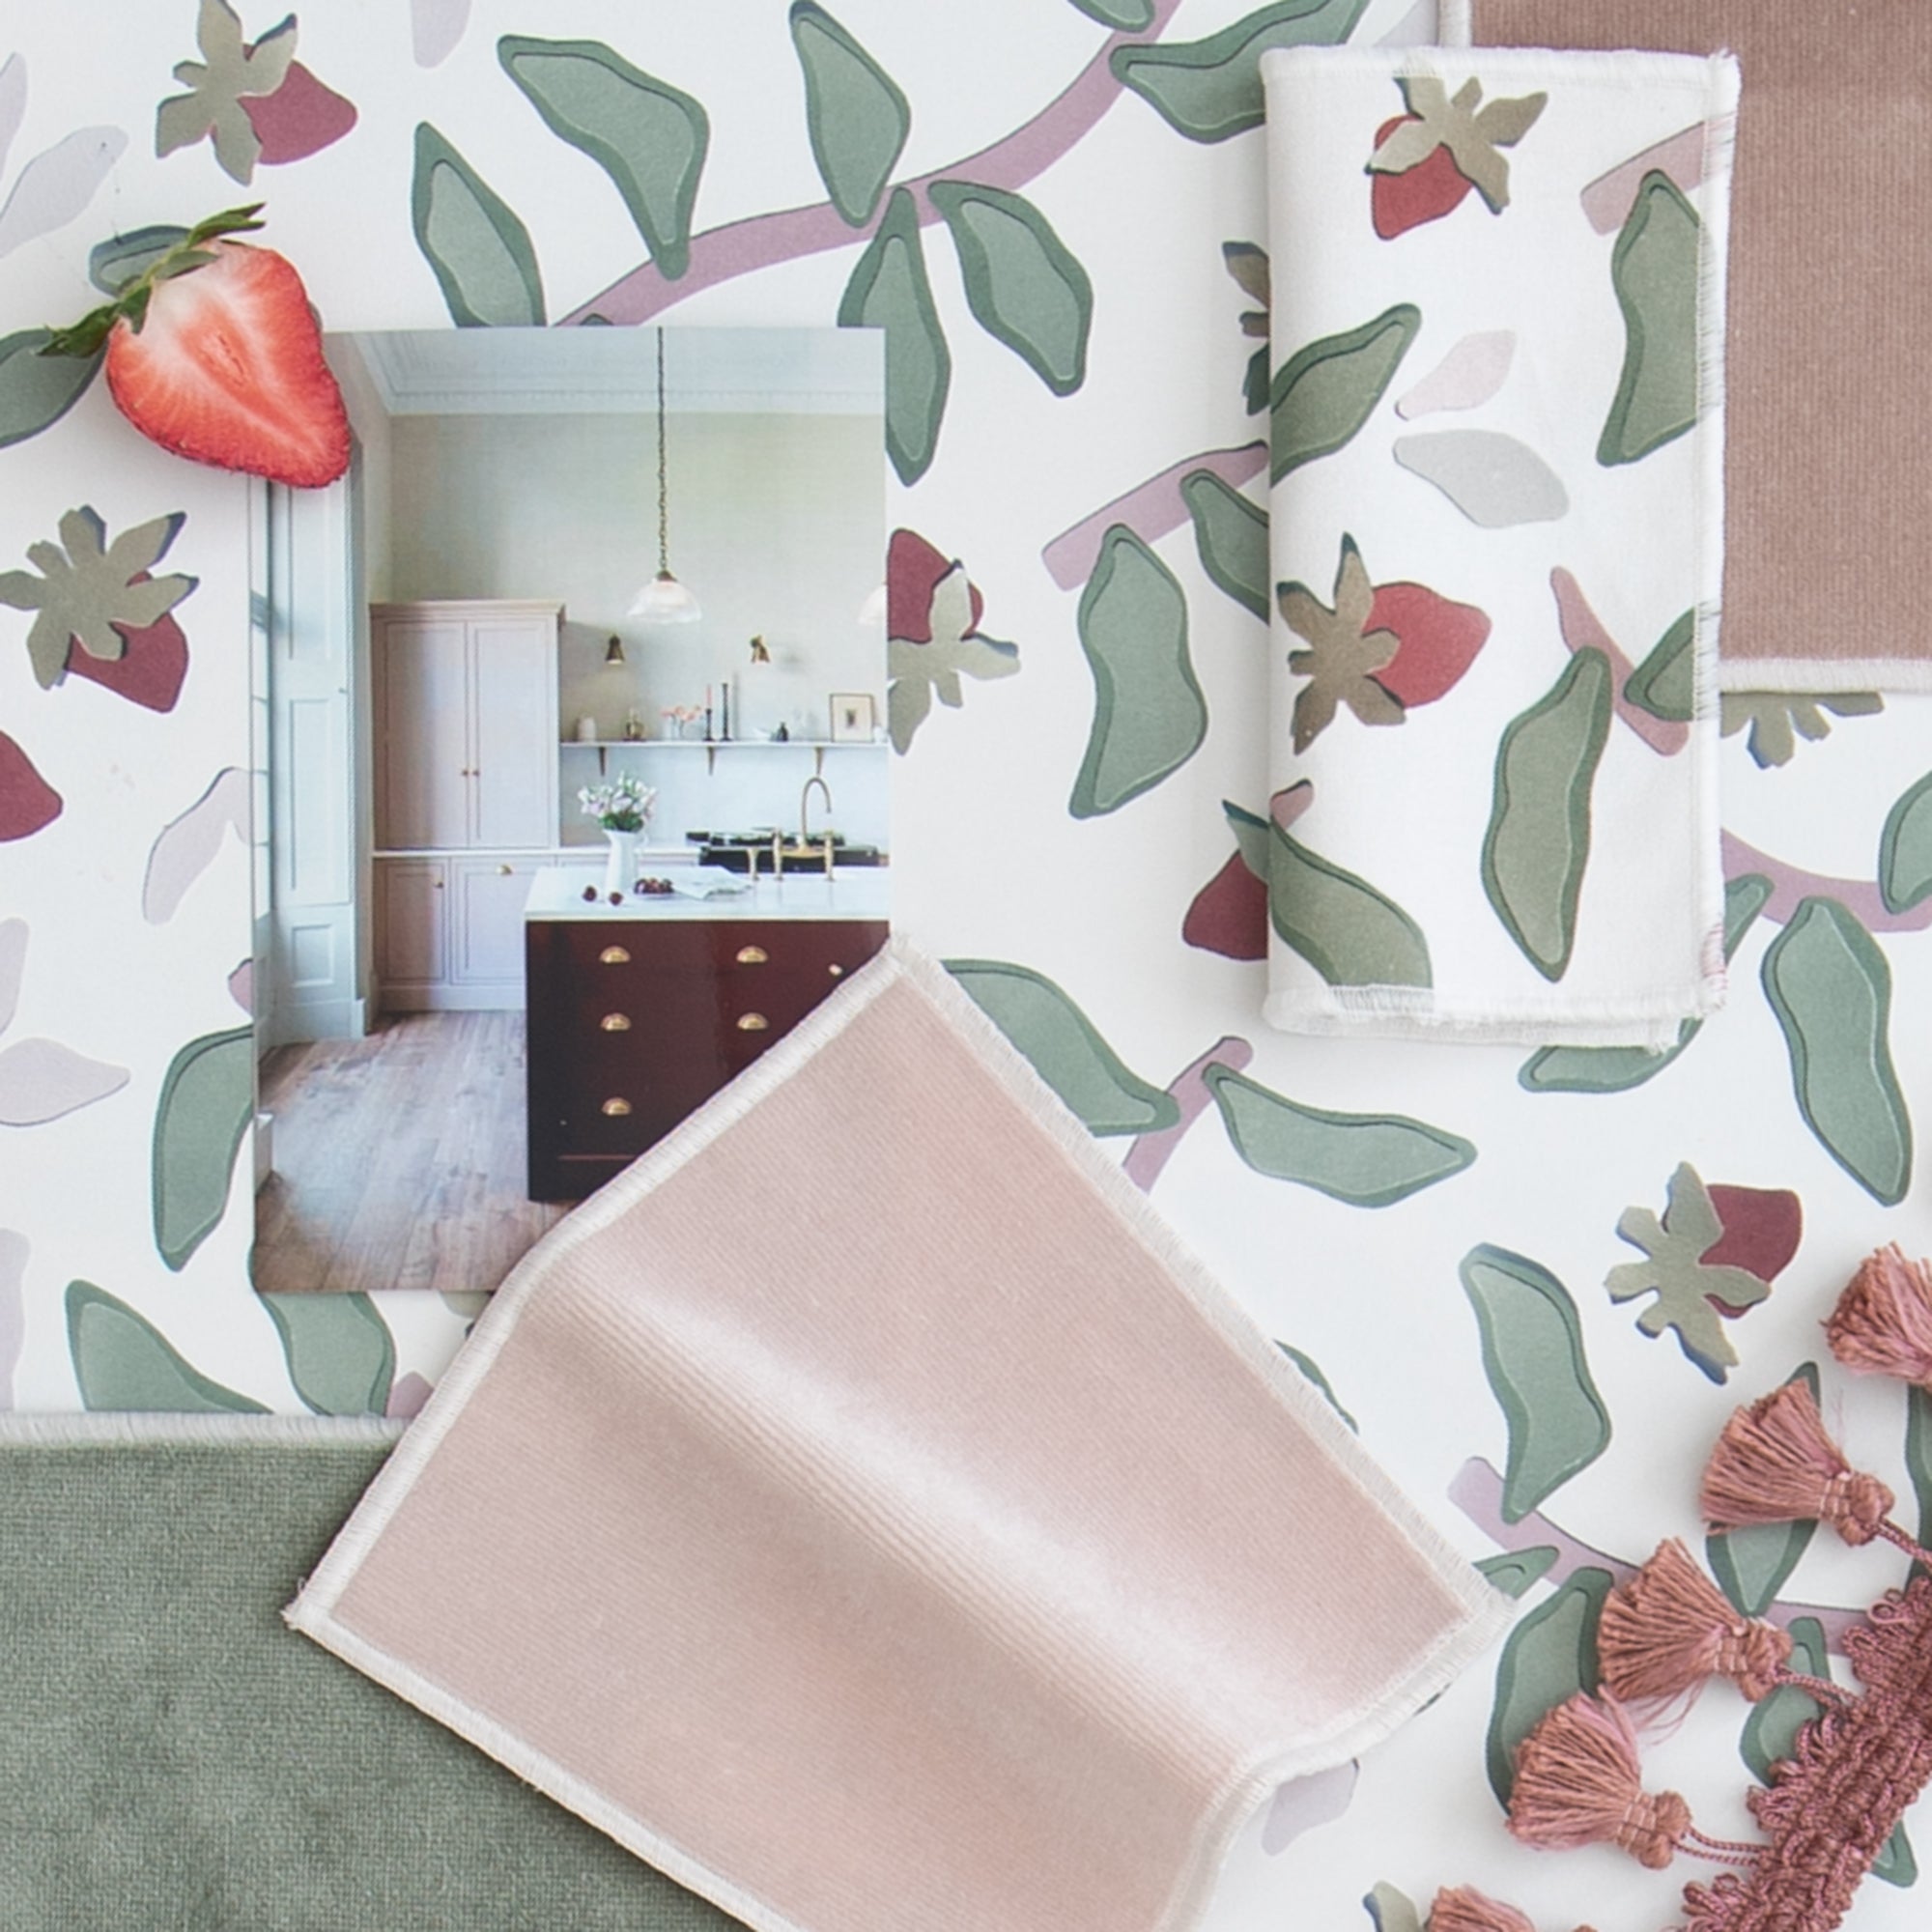 Interior design moodboard and fabric inspirations with Pink Velvet swatch, Mauve Velvet Swatch, Fern Green Velvet Swatch and Strawberry & Botanical Printed Swatch